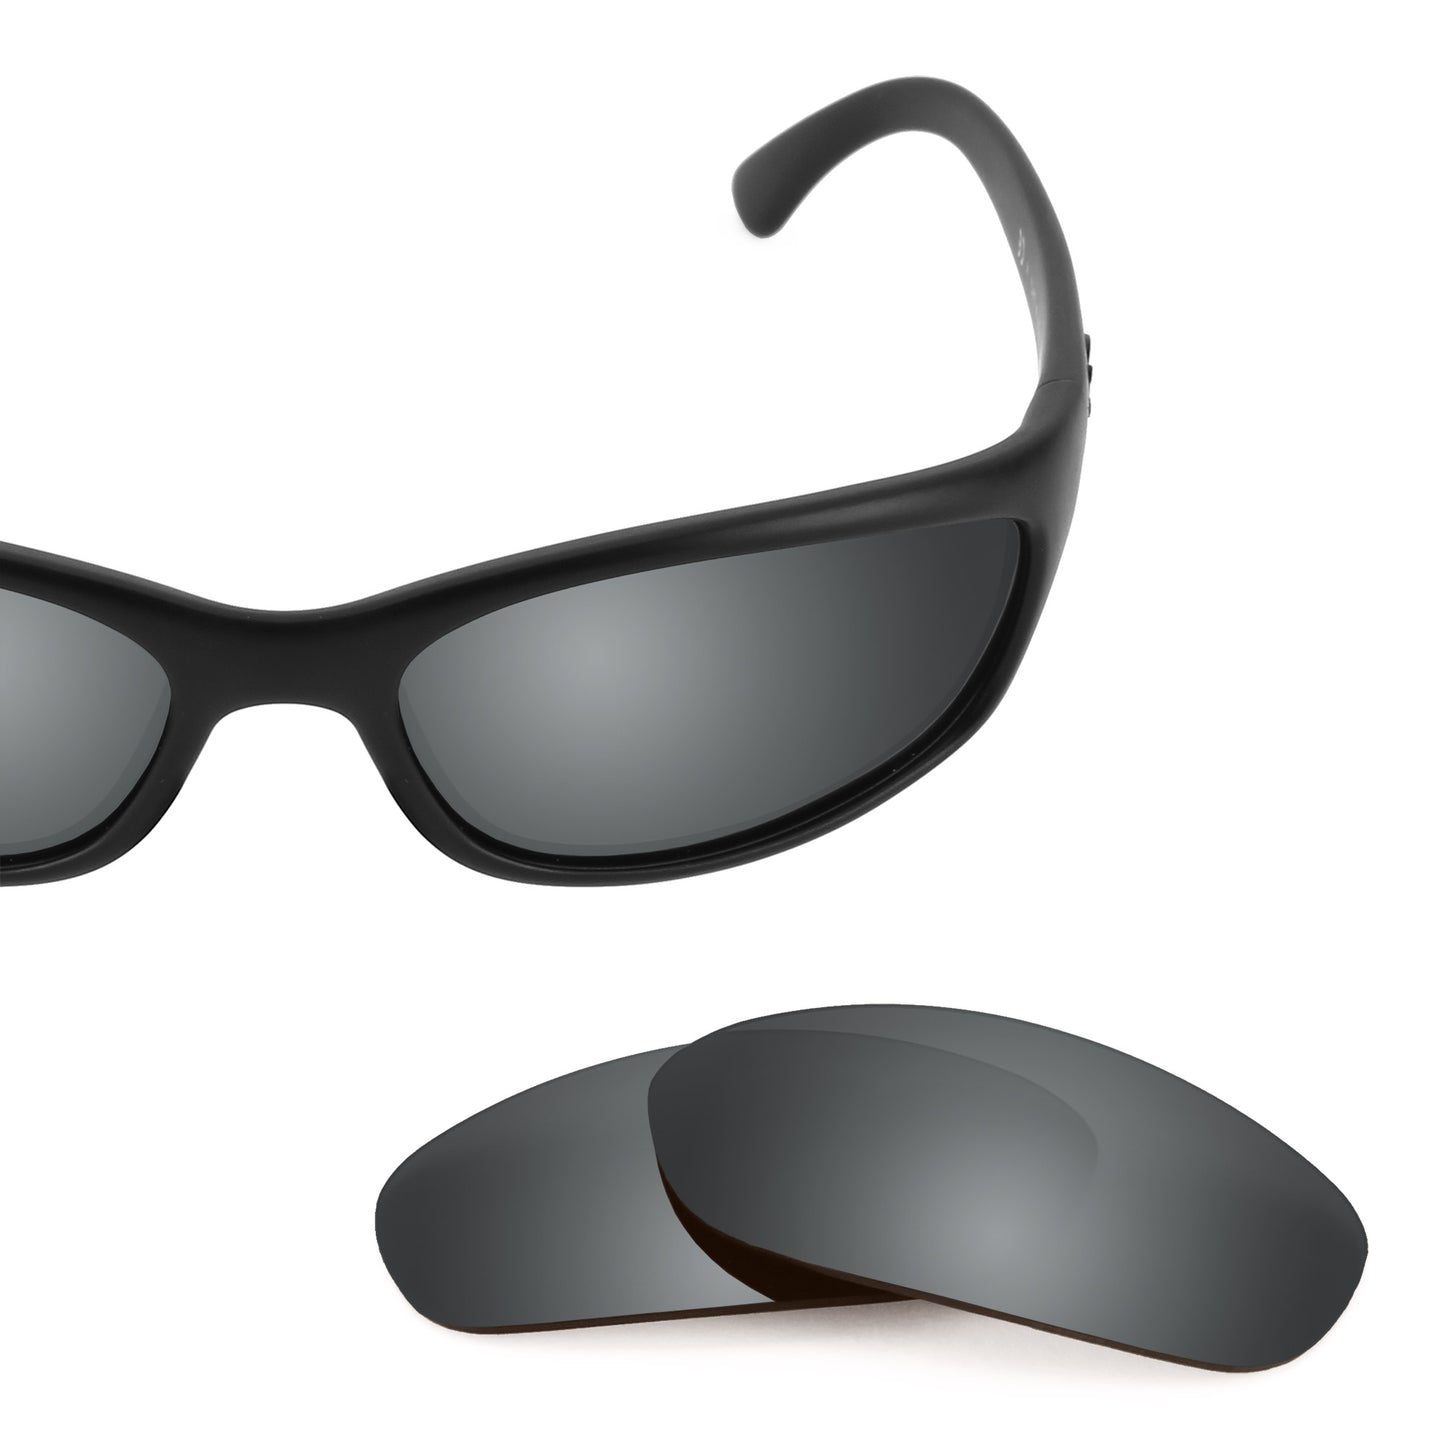 Revant replacement lenses for Ray-Ban RB4115 57mm Non-Polarized Black Chrome